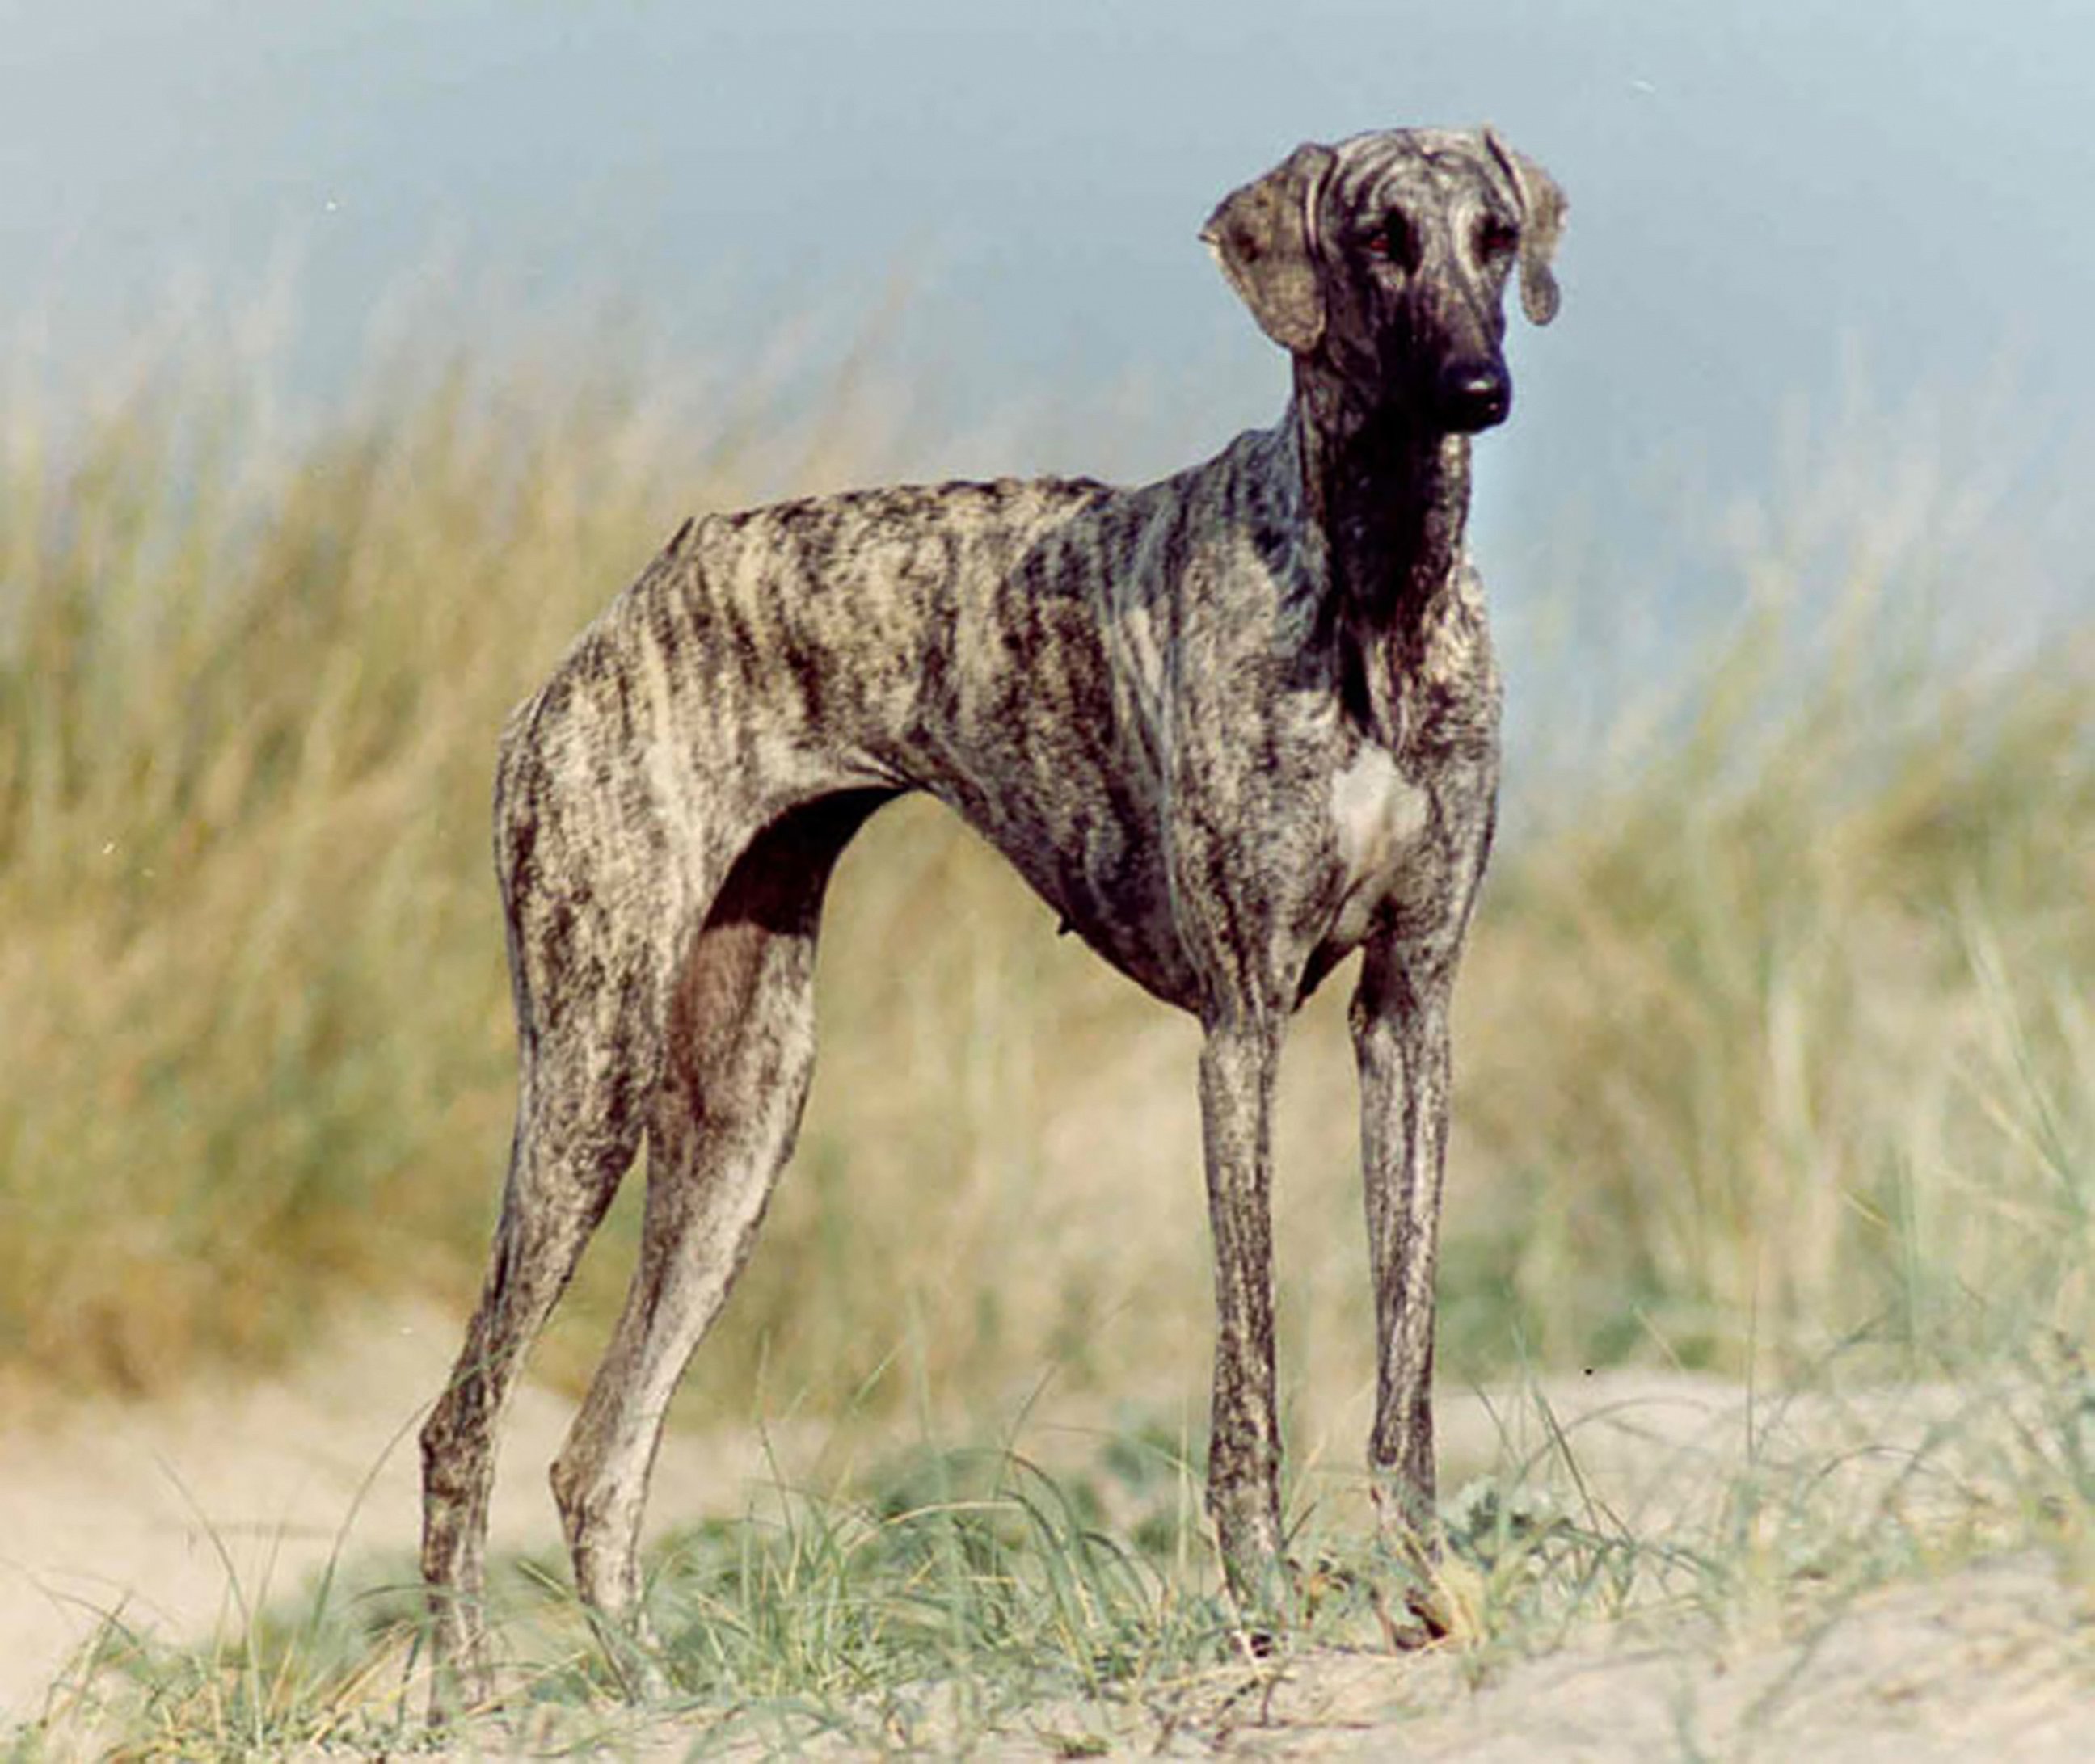 PHOTO: The new Westminster Kennel Club dog show eligible breed the Sloughi. 